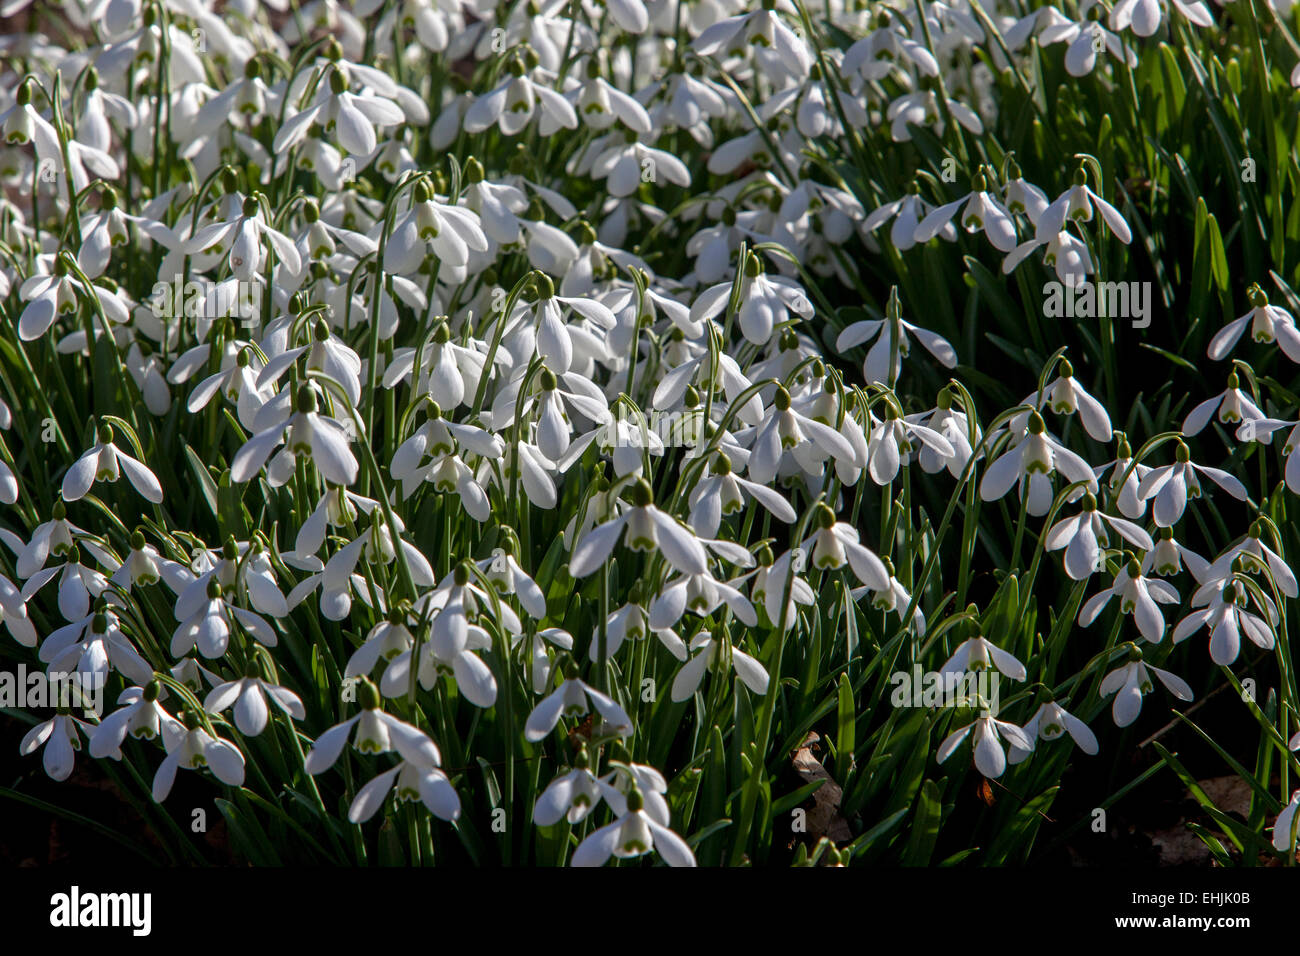 Galanthus nivalis White Snowdrops Early Spring garden flowers in lawn in the flowerbed Stock Photo